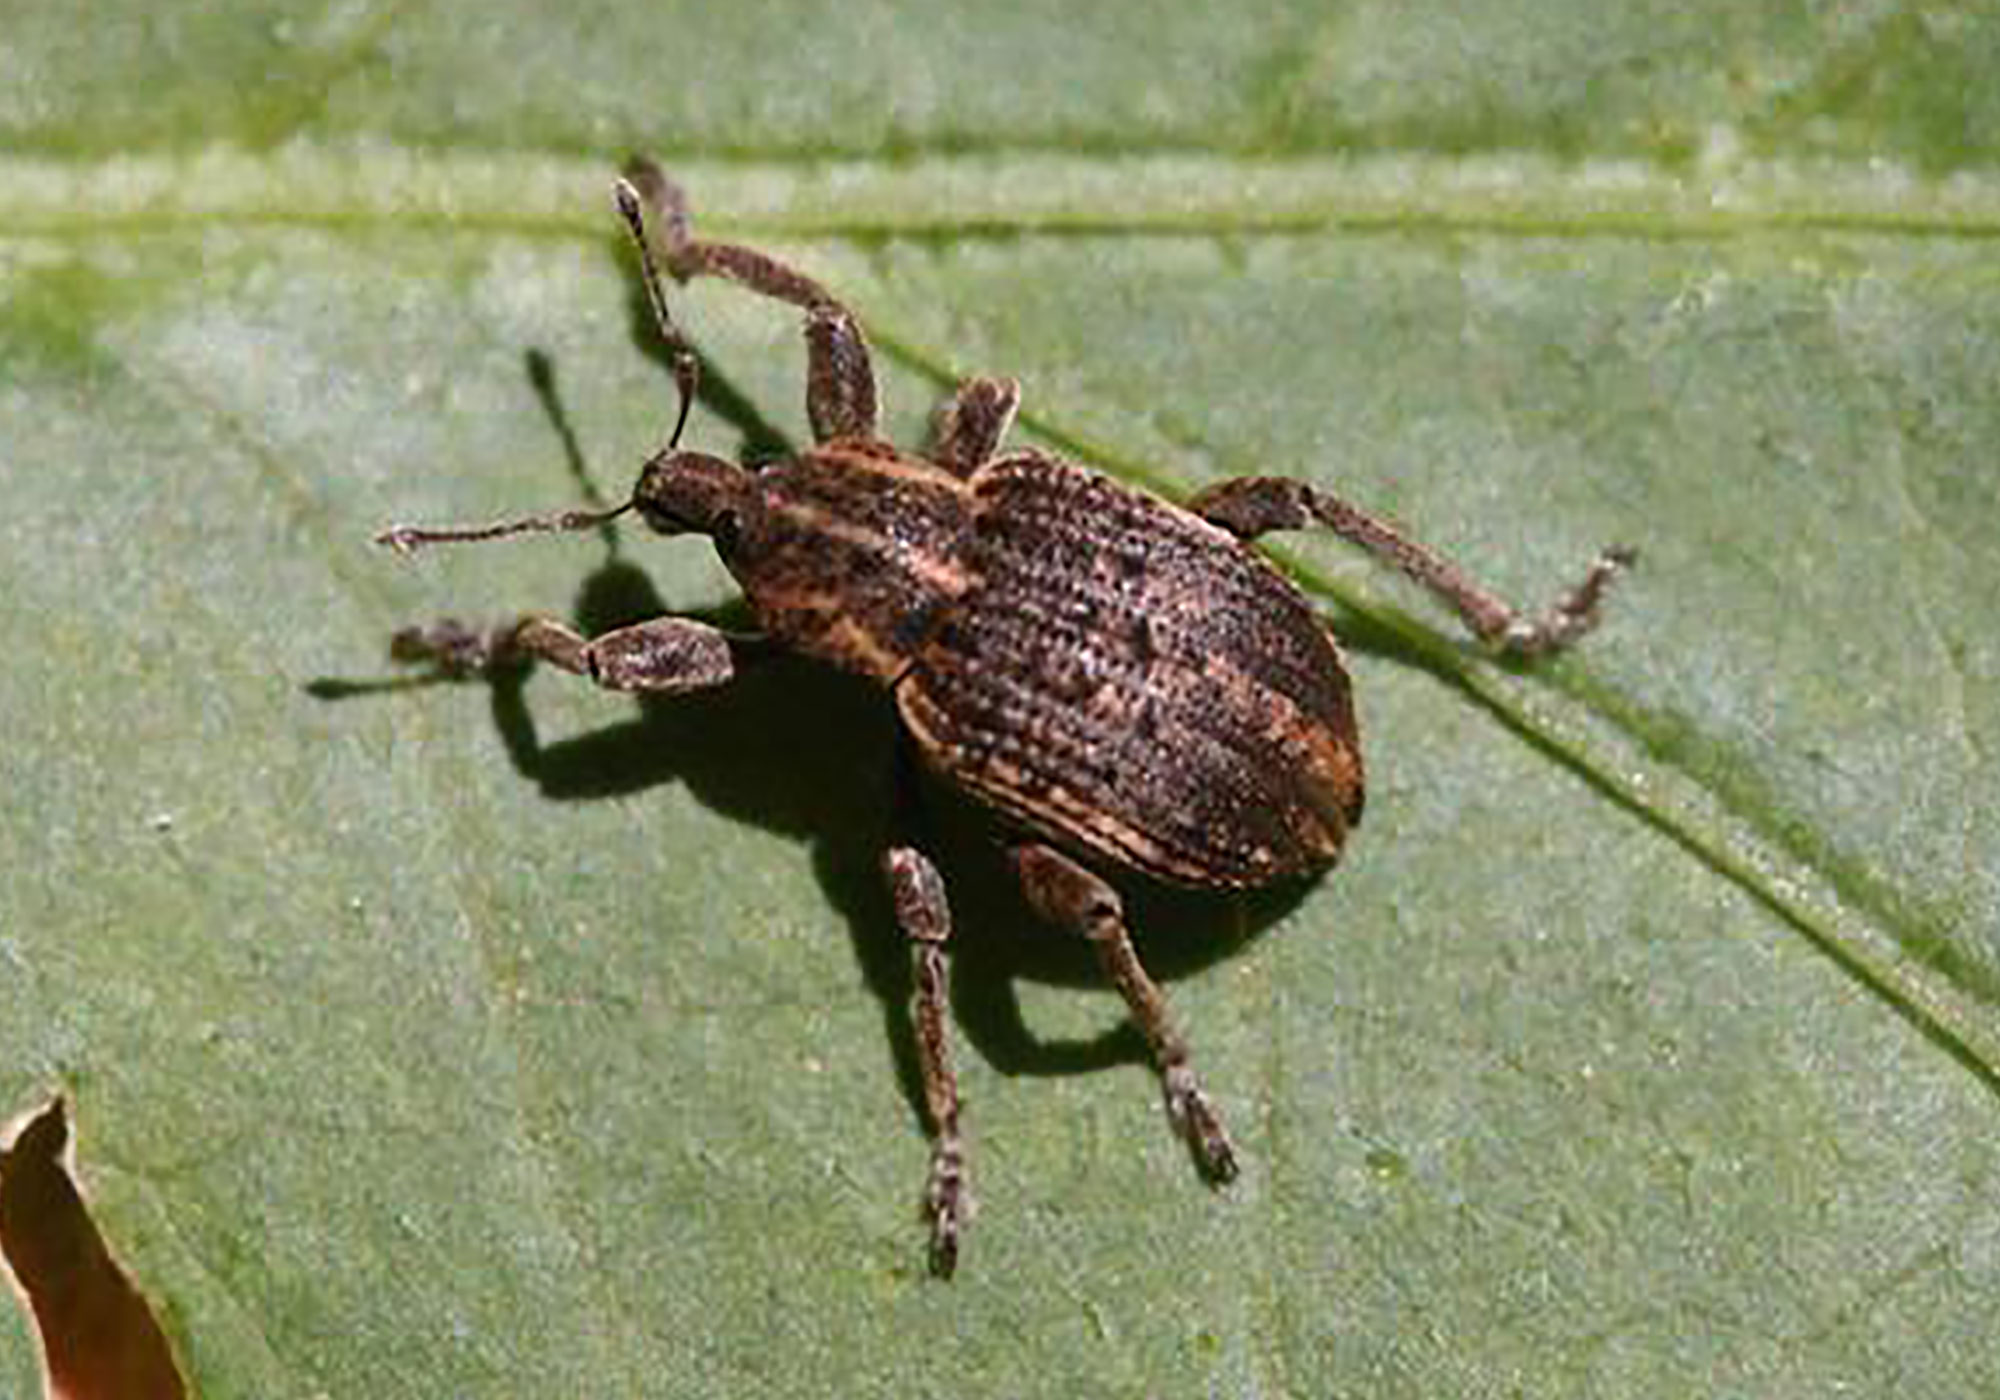 Brown weevil with light brown stripes on tis body.